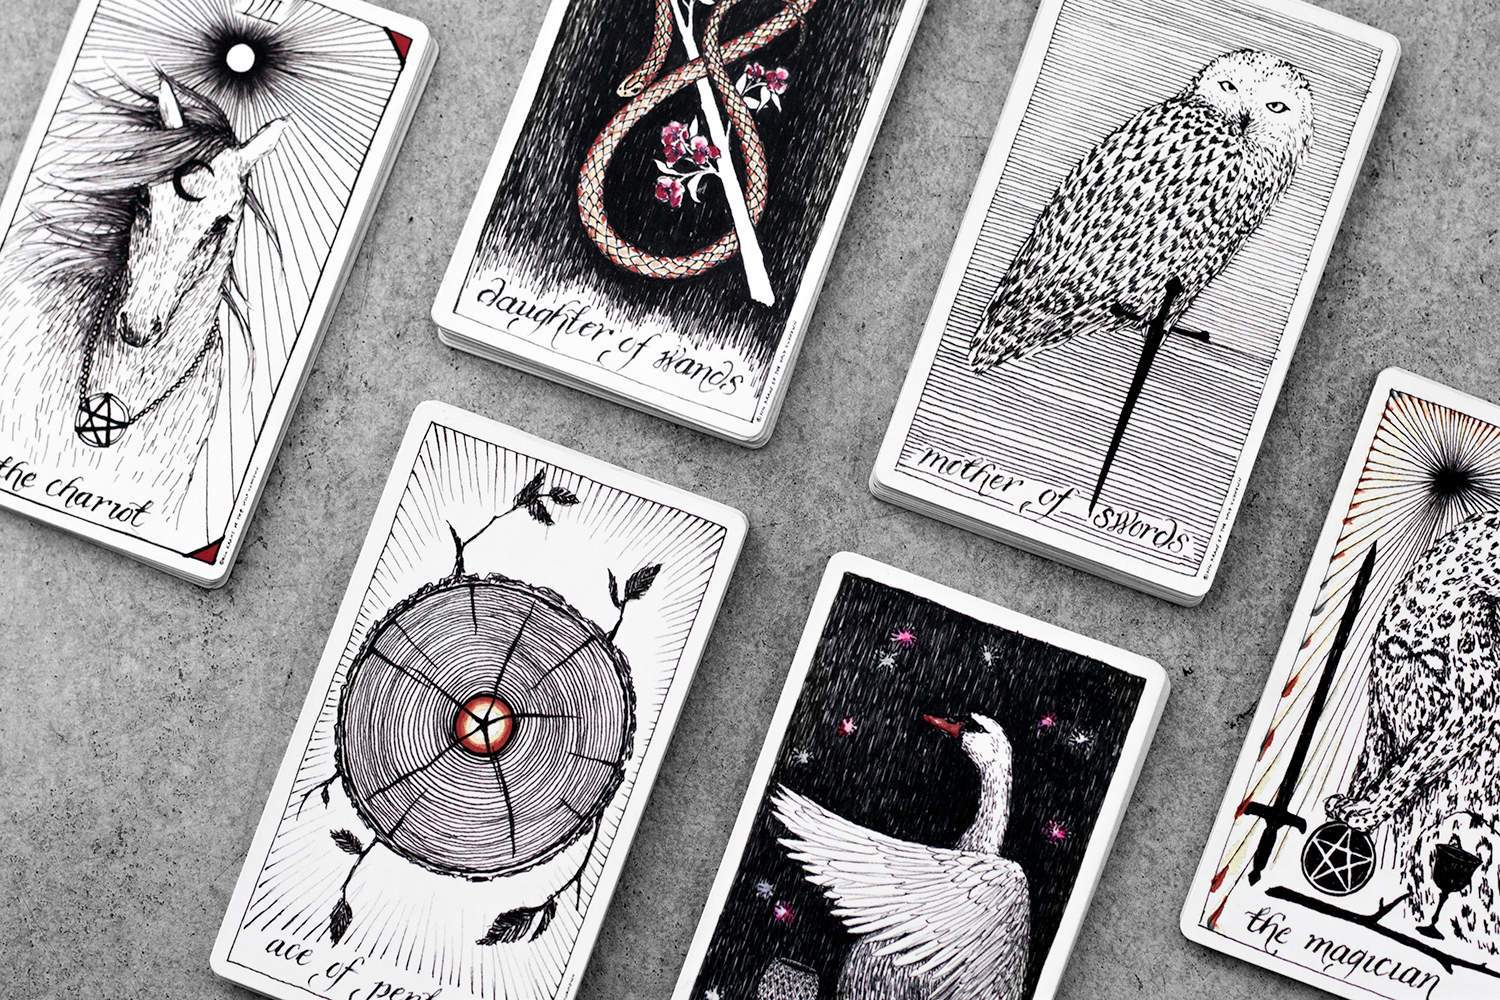 fashionlush, the wild unknown, how to read tarot